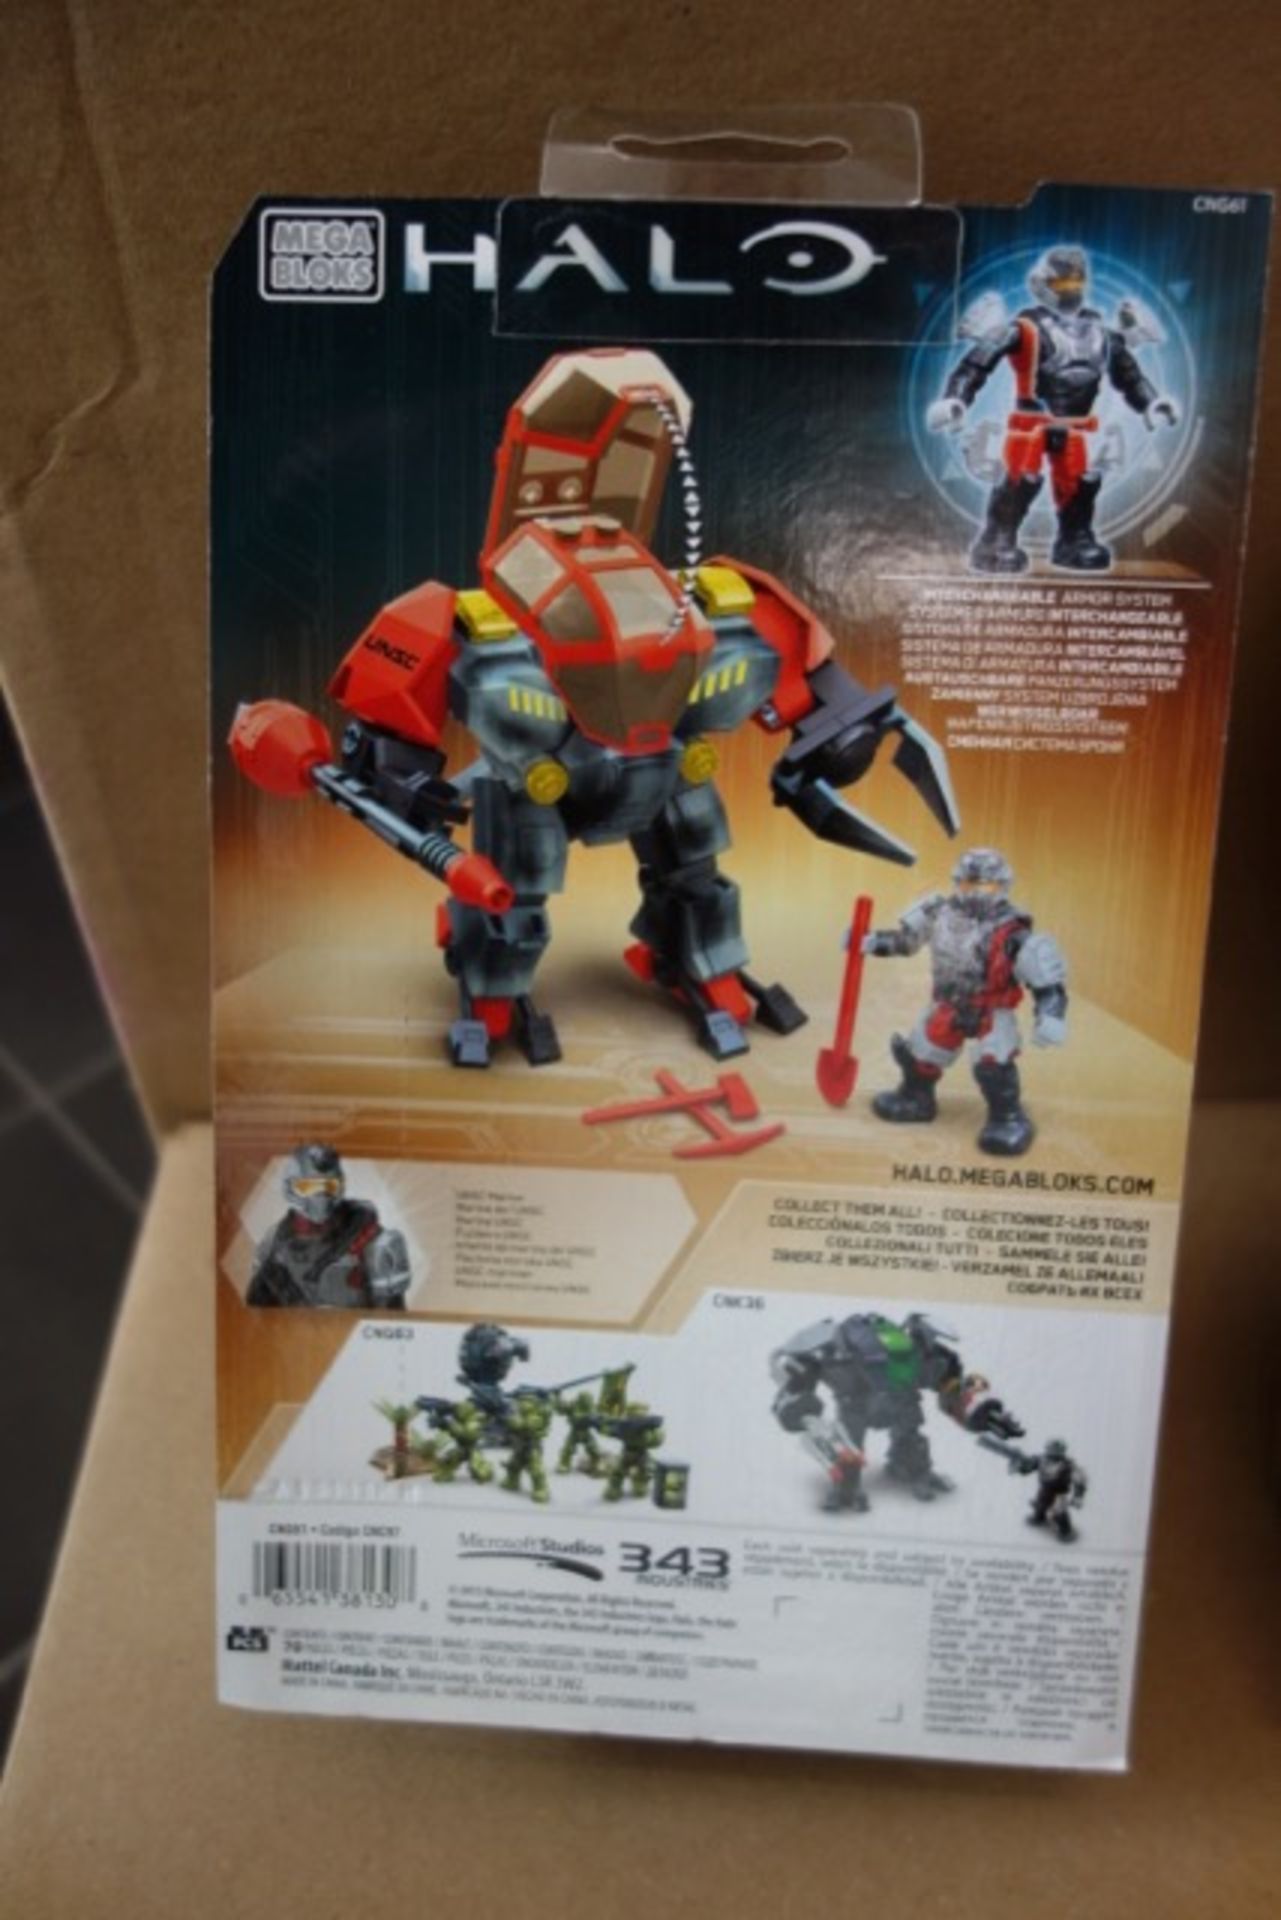 20 x Brand New Mega Bloks Halo Cyclops - Includes a mix of: Damage control cyclops, Flood infected - Image 5 of 7